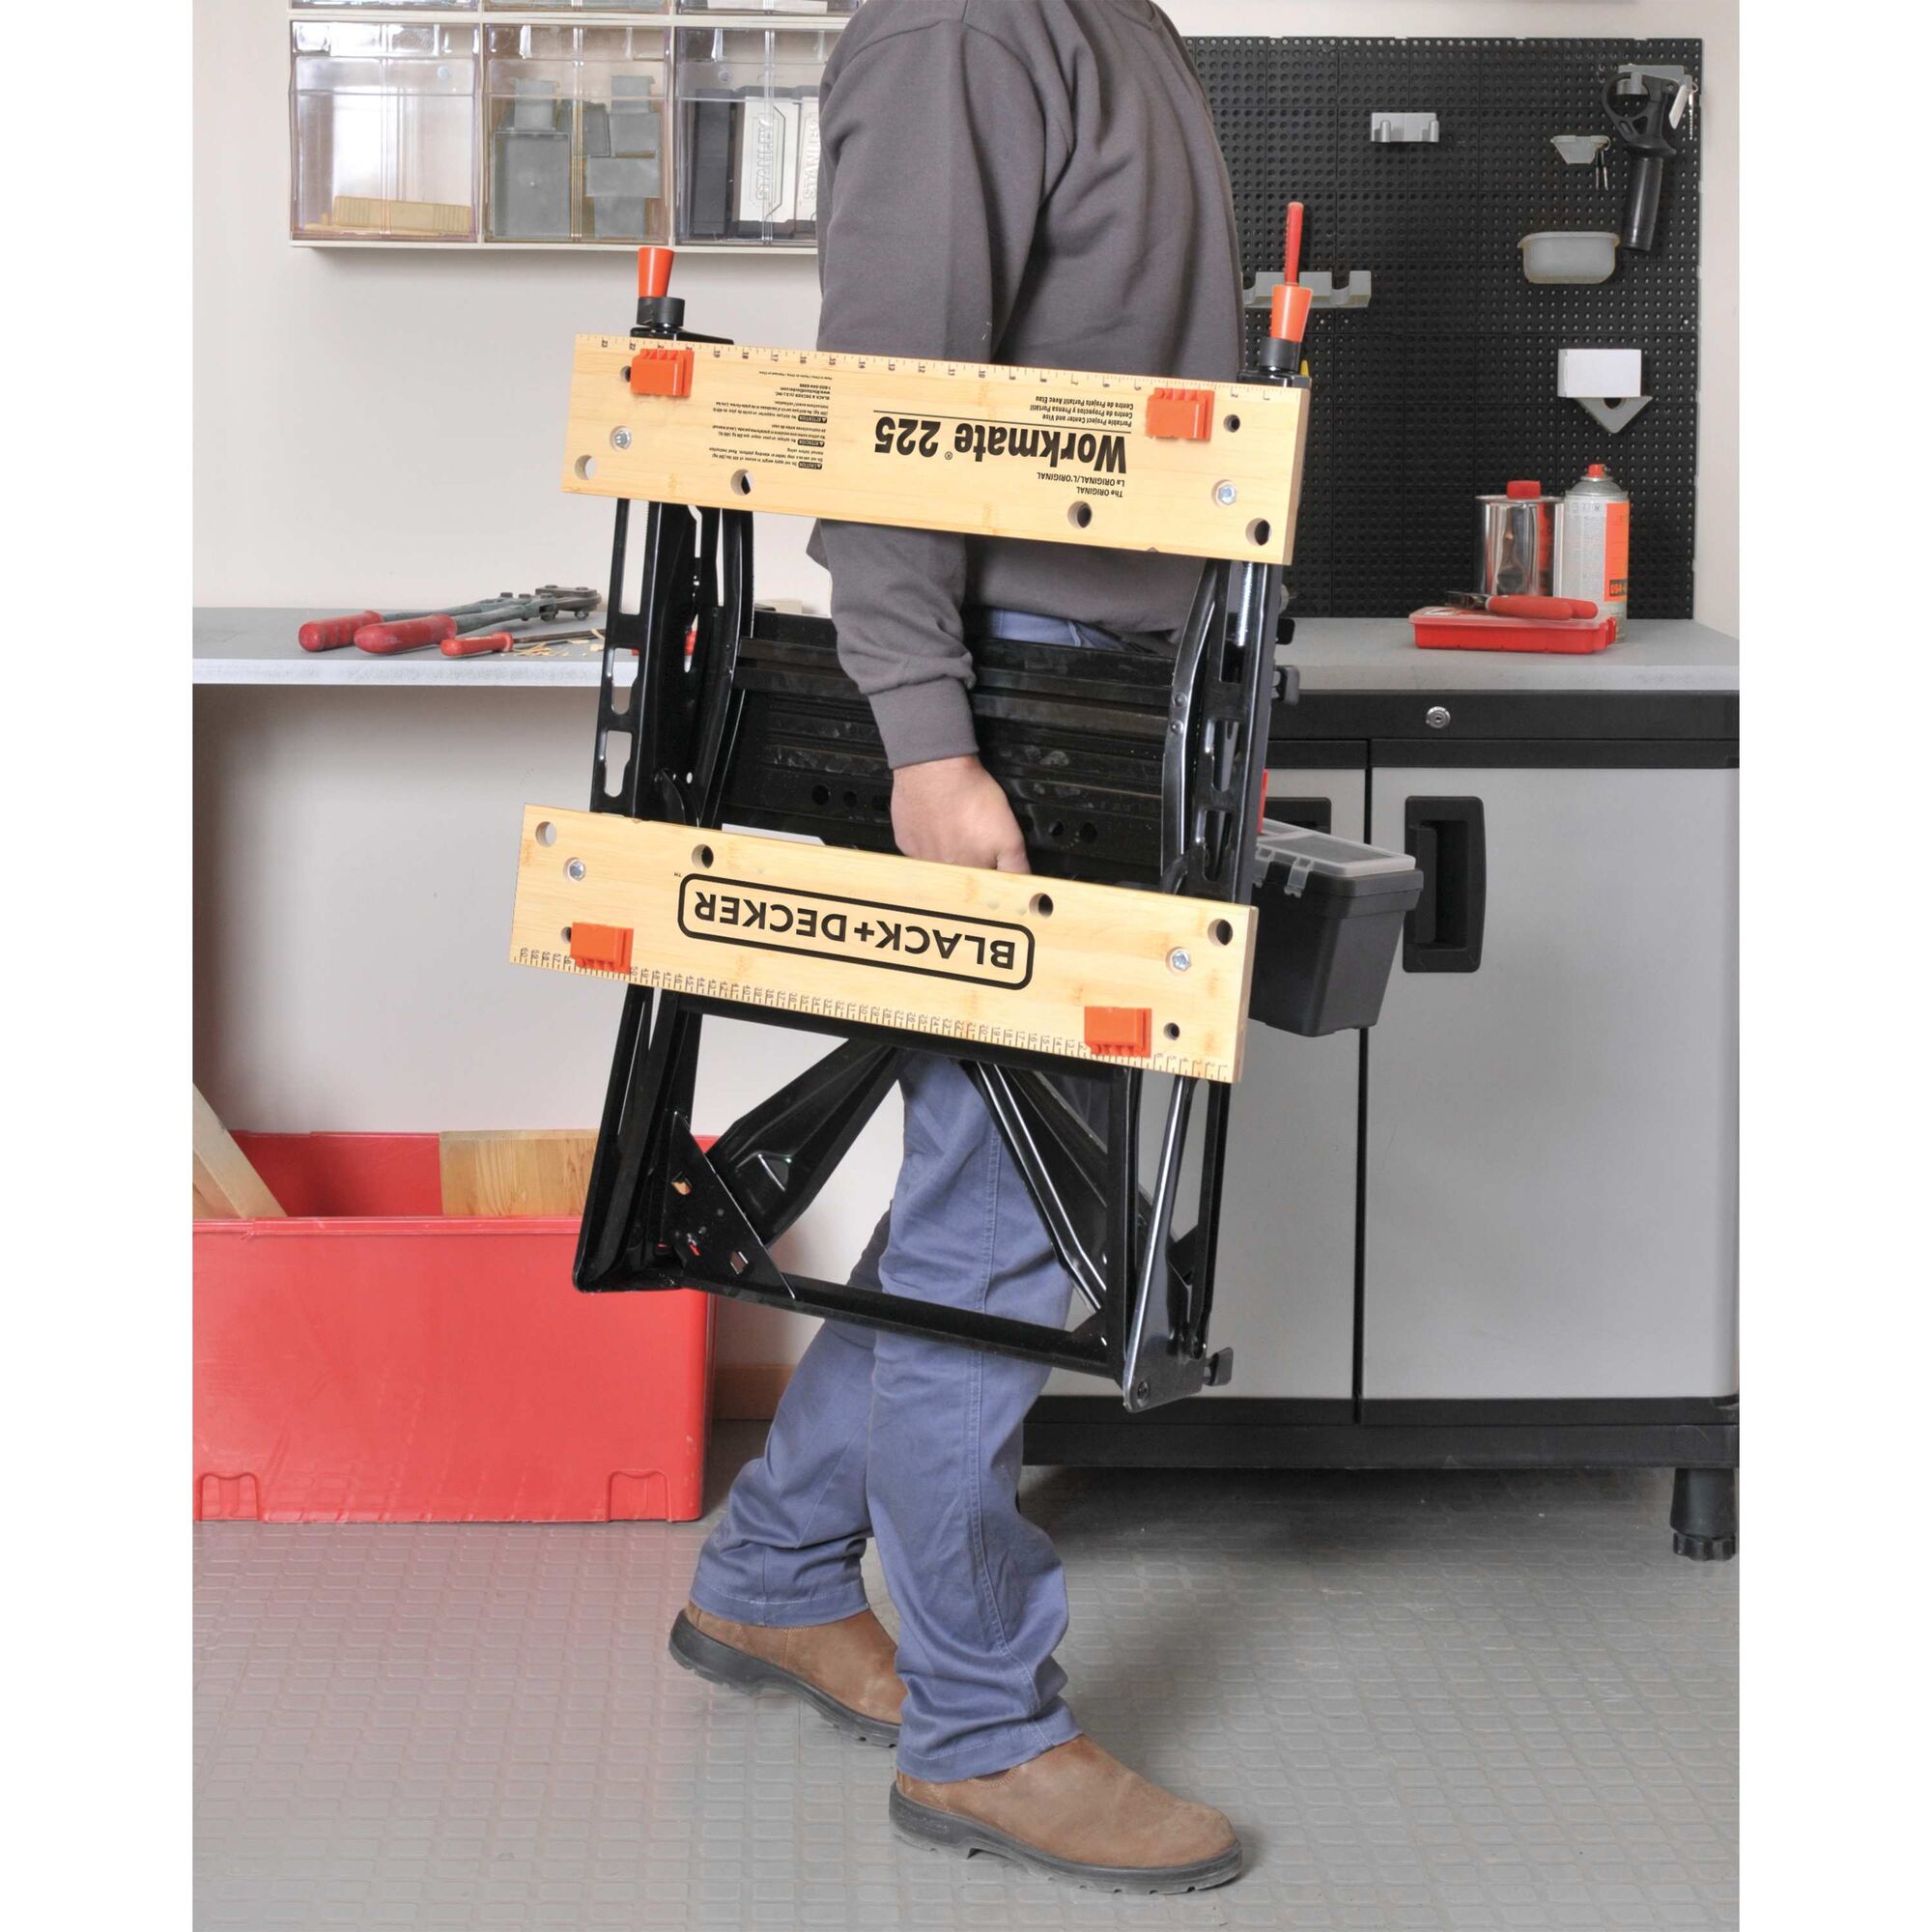 Workmat 225 Portable Work Center and Vise being carried by a person.